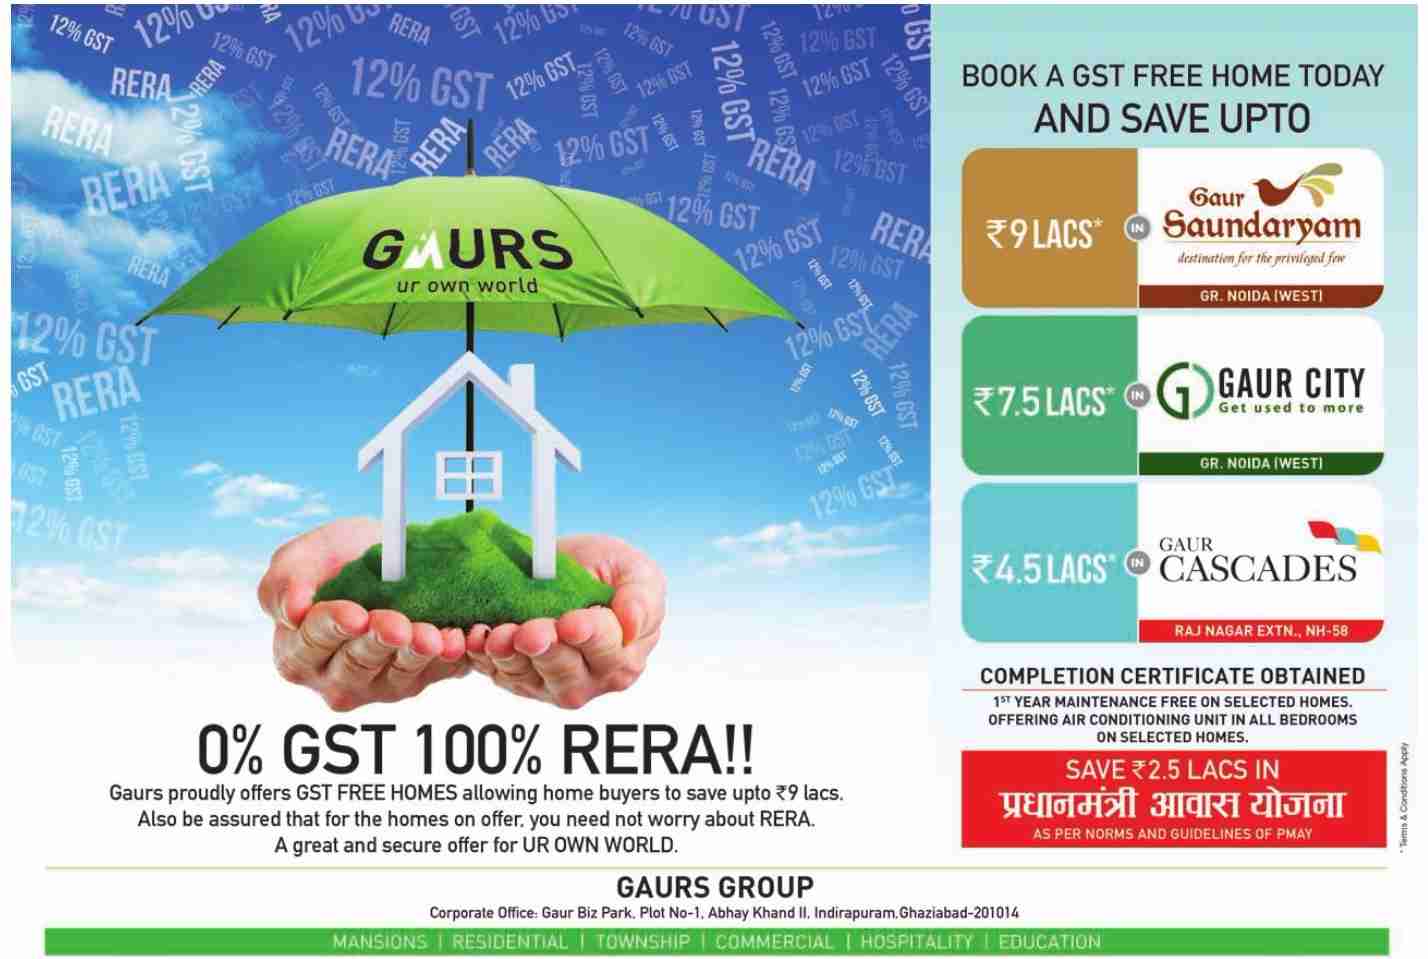 Book a GST free home today at Gaur and save upto 9 lacs Update